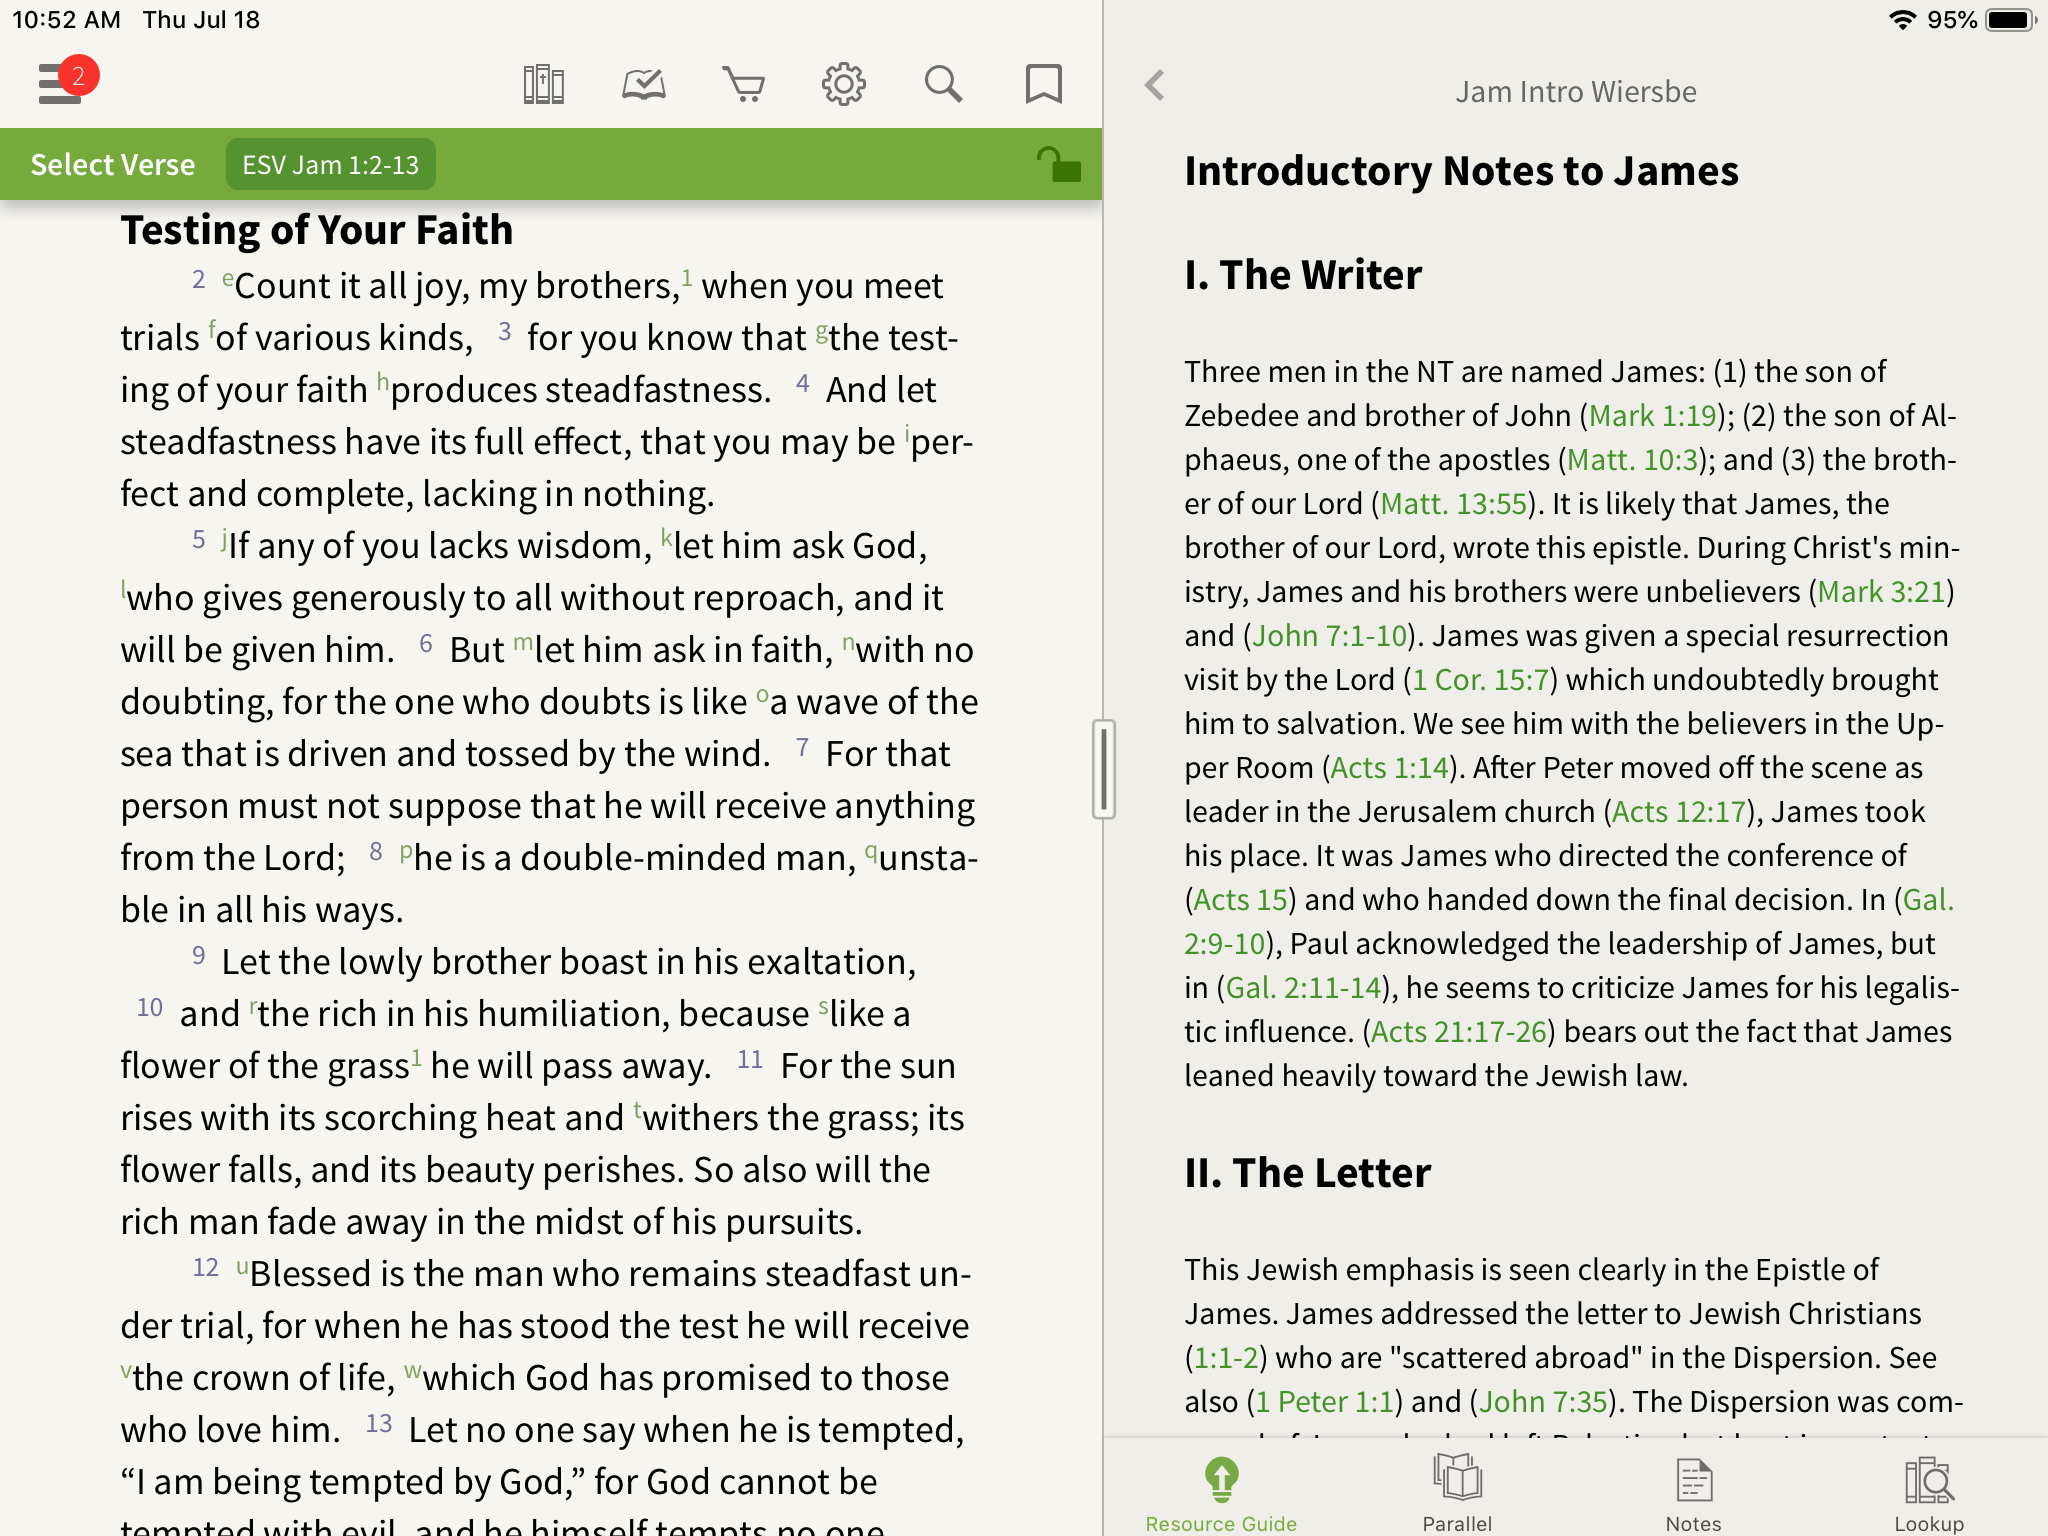 Wiesrbe Introduction in the Olive Tree Bible App